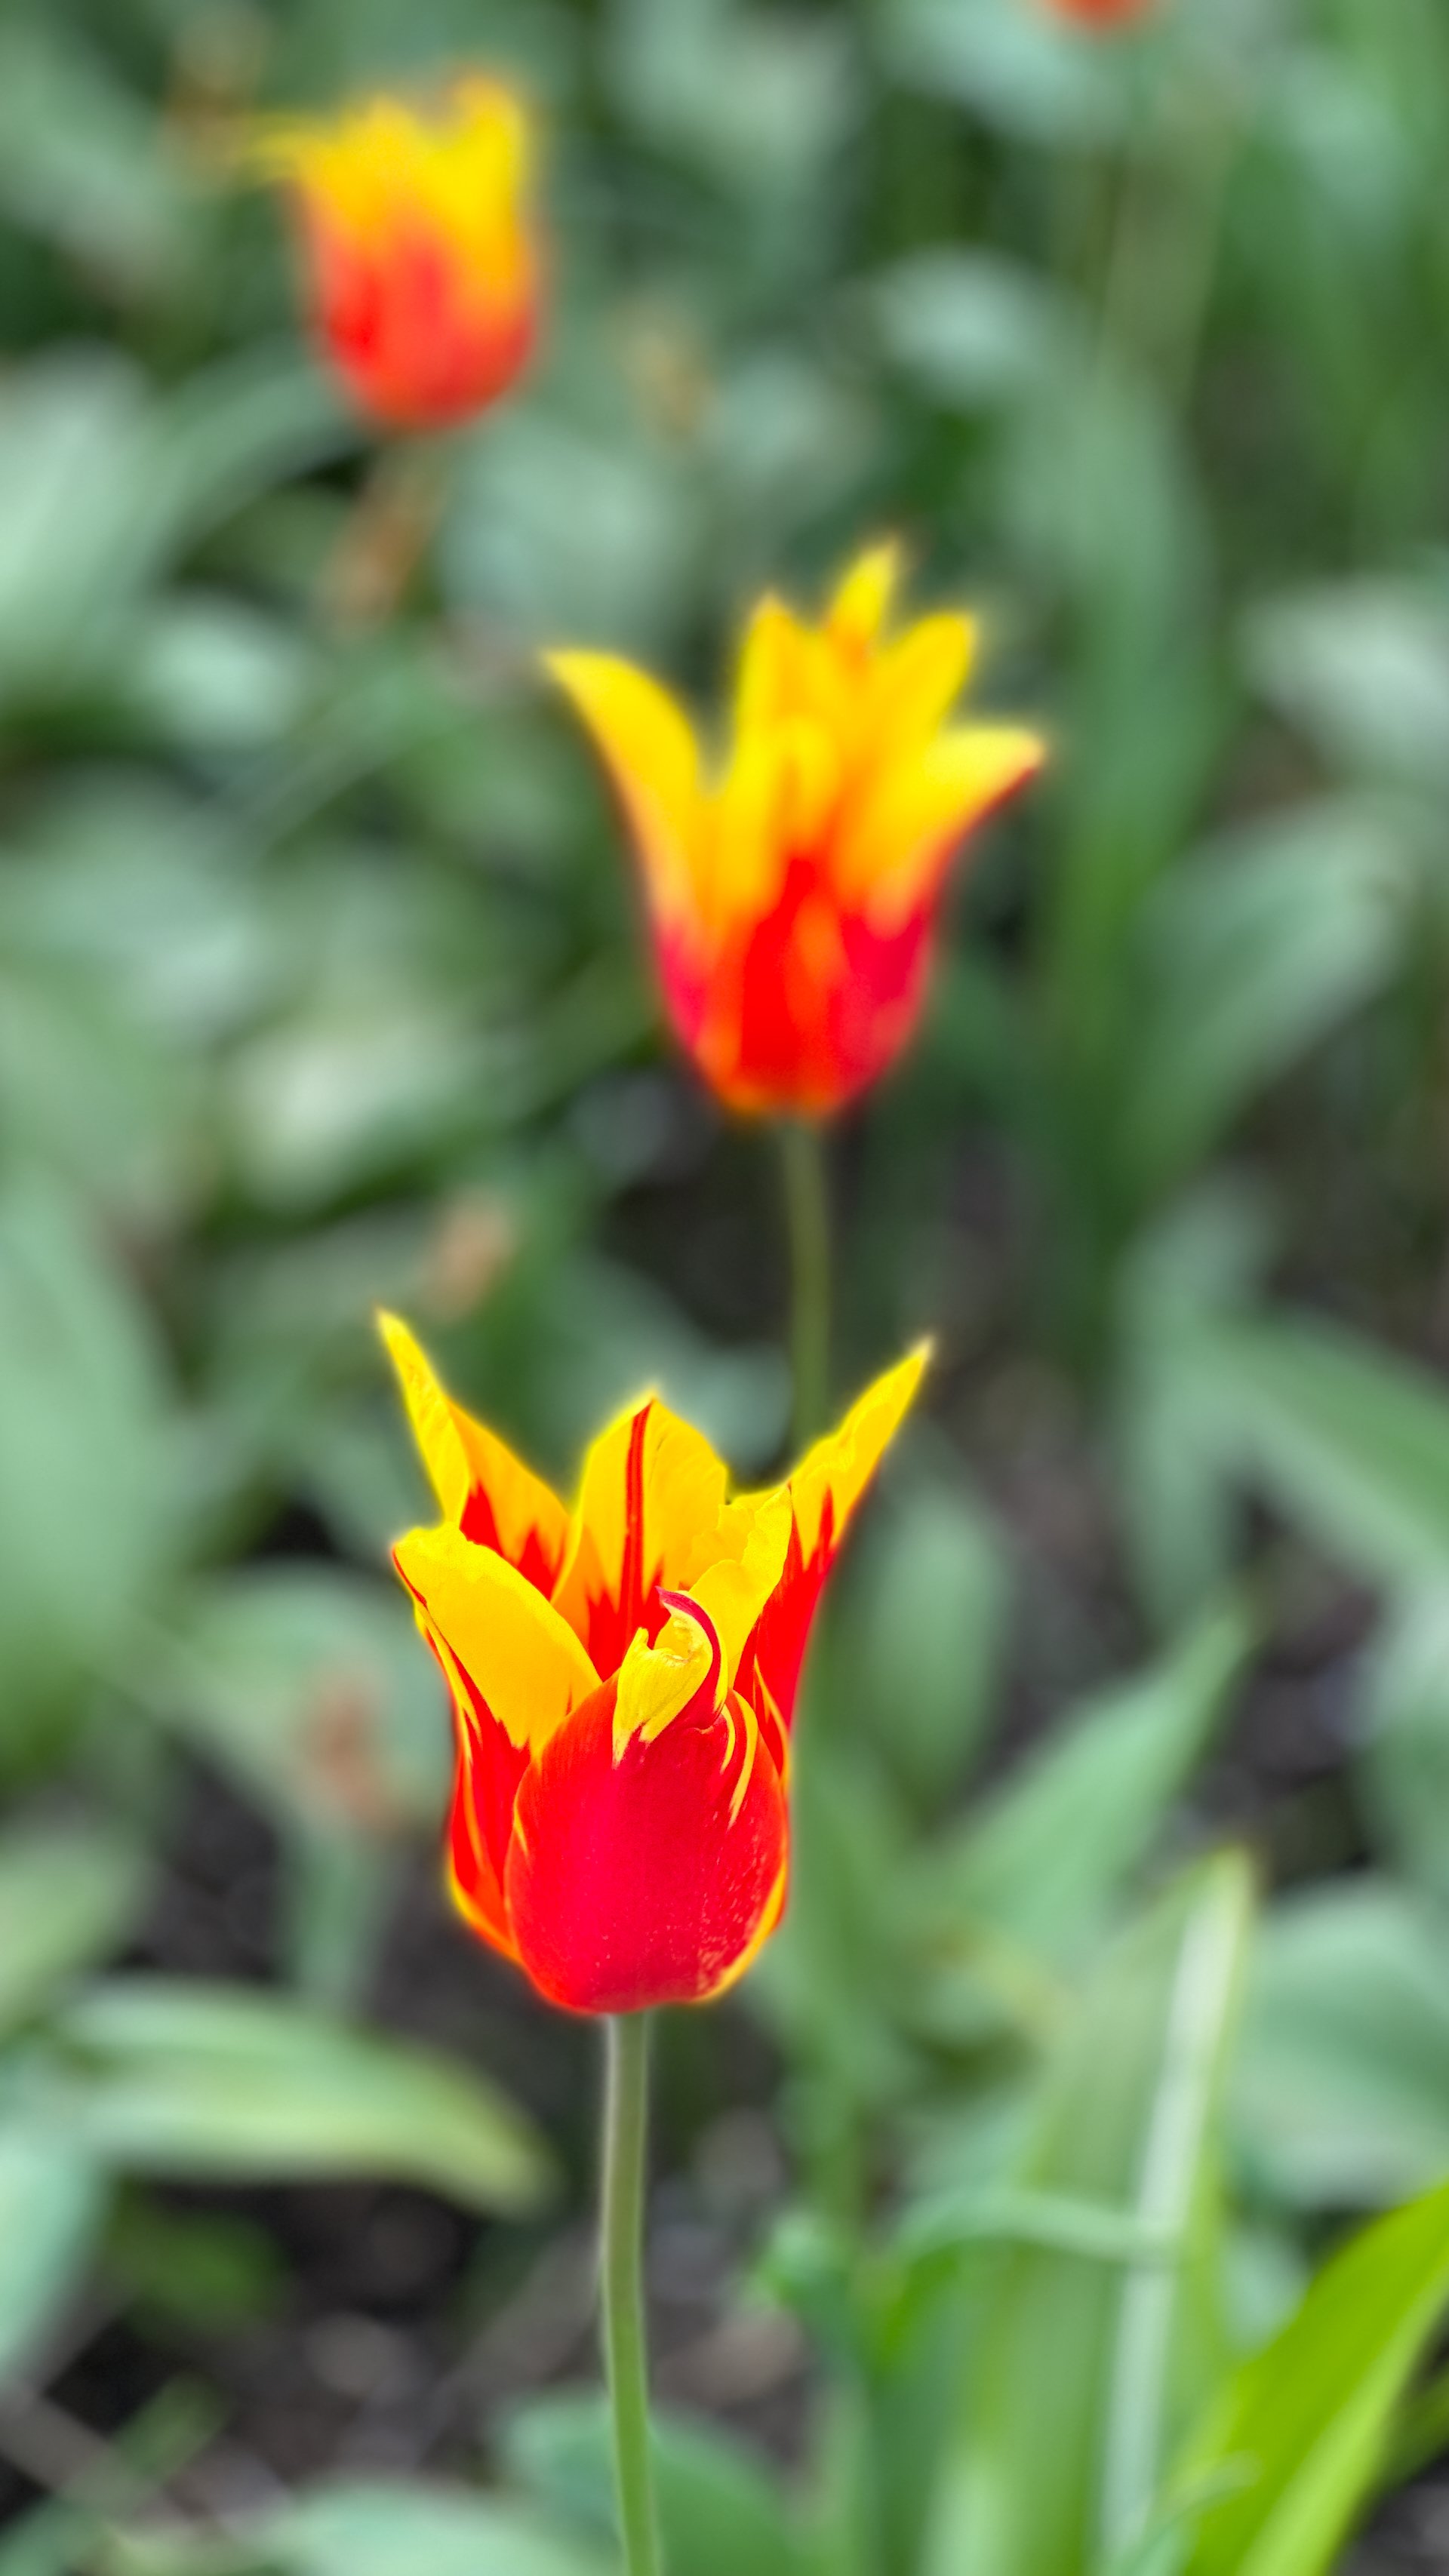  More very cool tulips. 